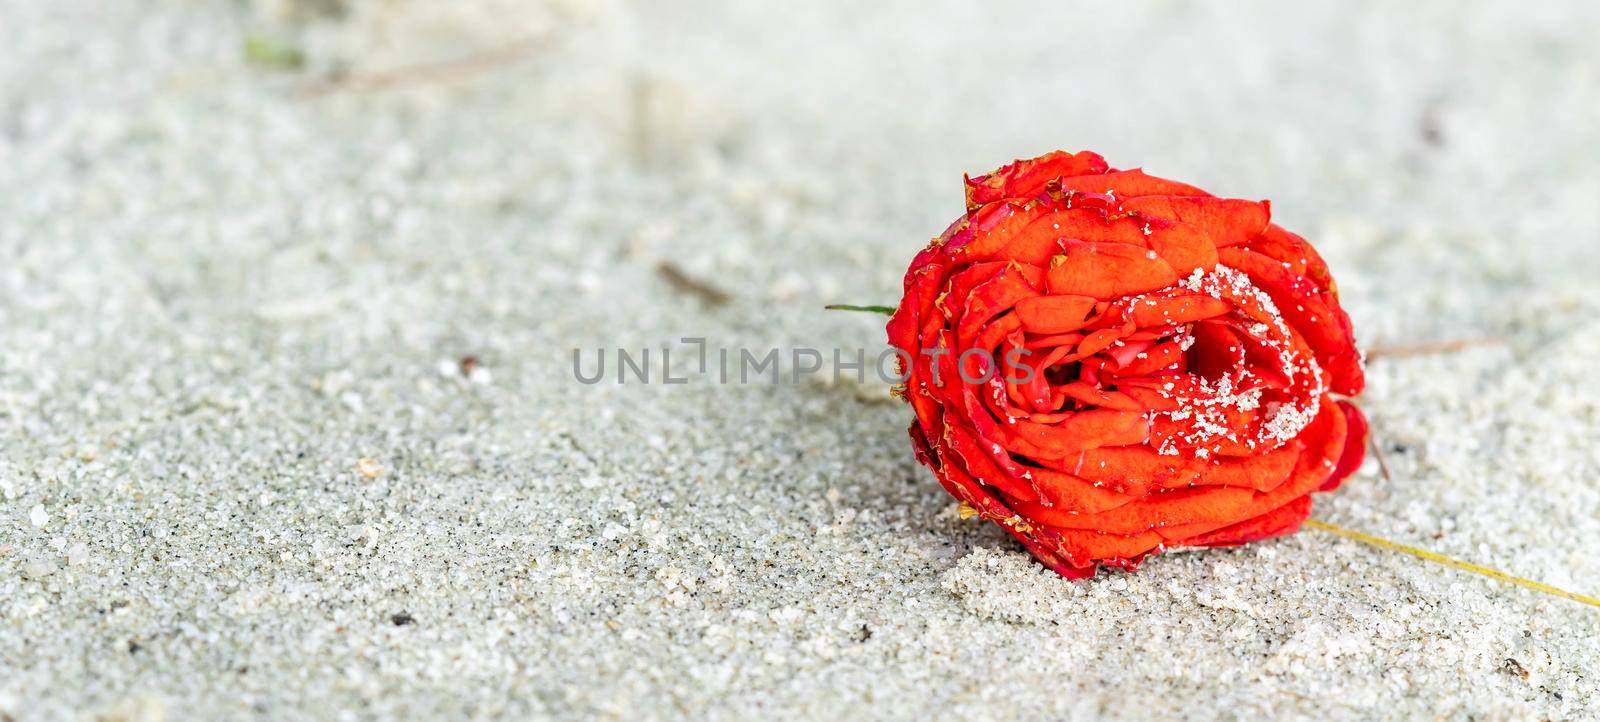 Red rose on the beach with the sand. Macro shot of red rose on beach covered with sand